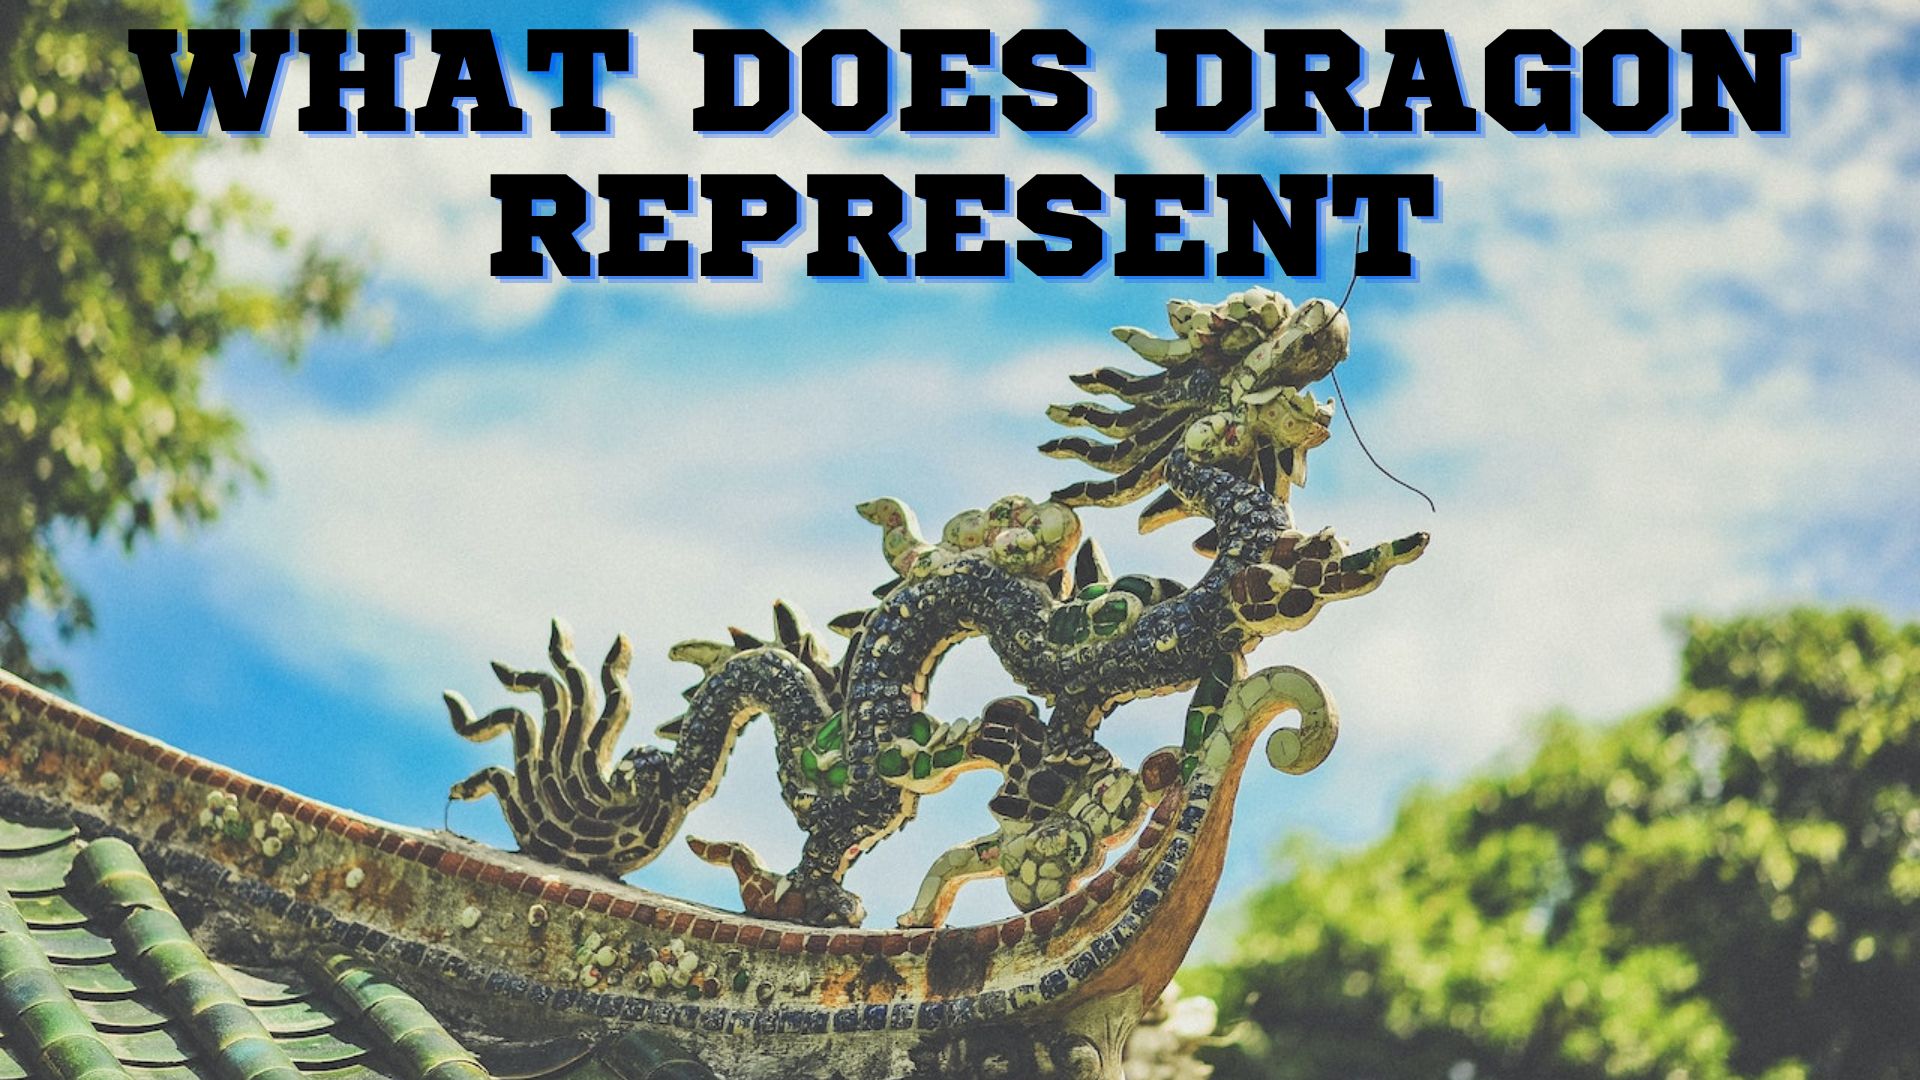 What Does Dragon Represent? Represents Fortune, Authority, Growth, Luck And Development